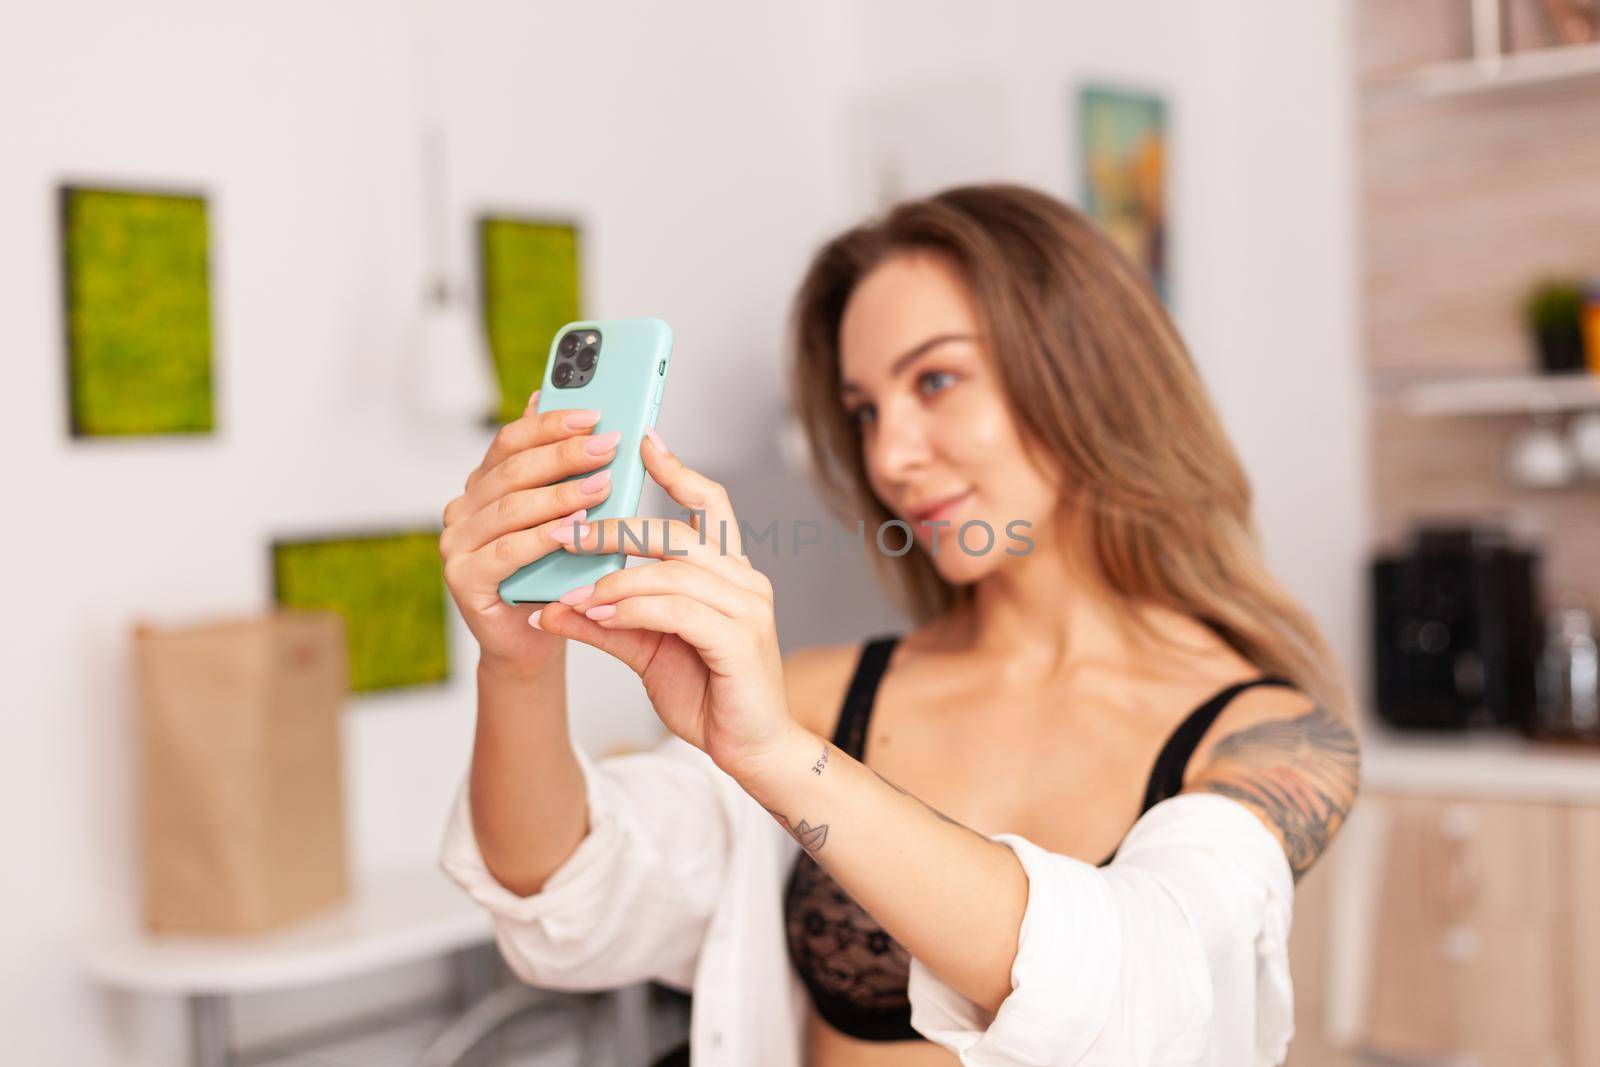 Portrait of beautiful woman looking at phone camera while taking selfie in home kitchen weraring sexy underwear. Seductive woman with tattoos using smartphone wearing temping lingerie in the morning.